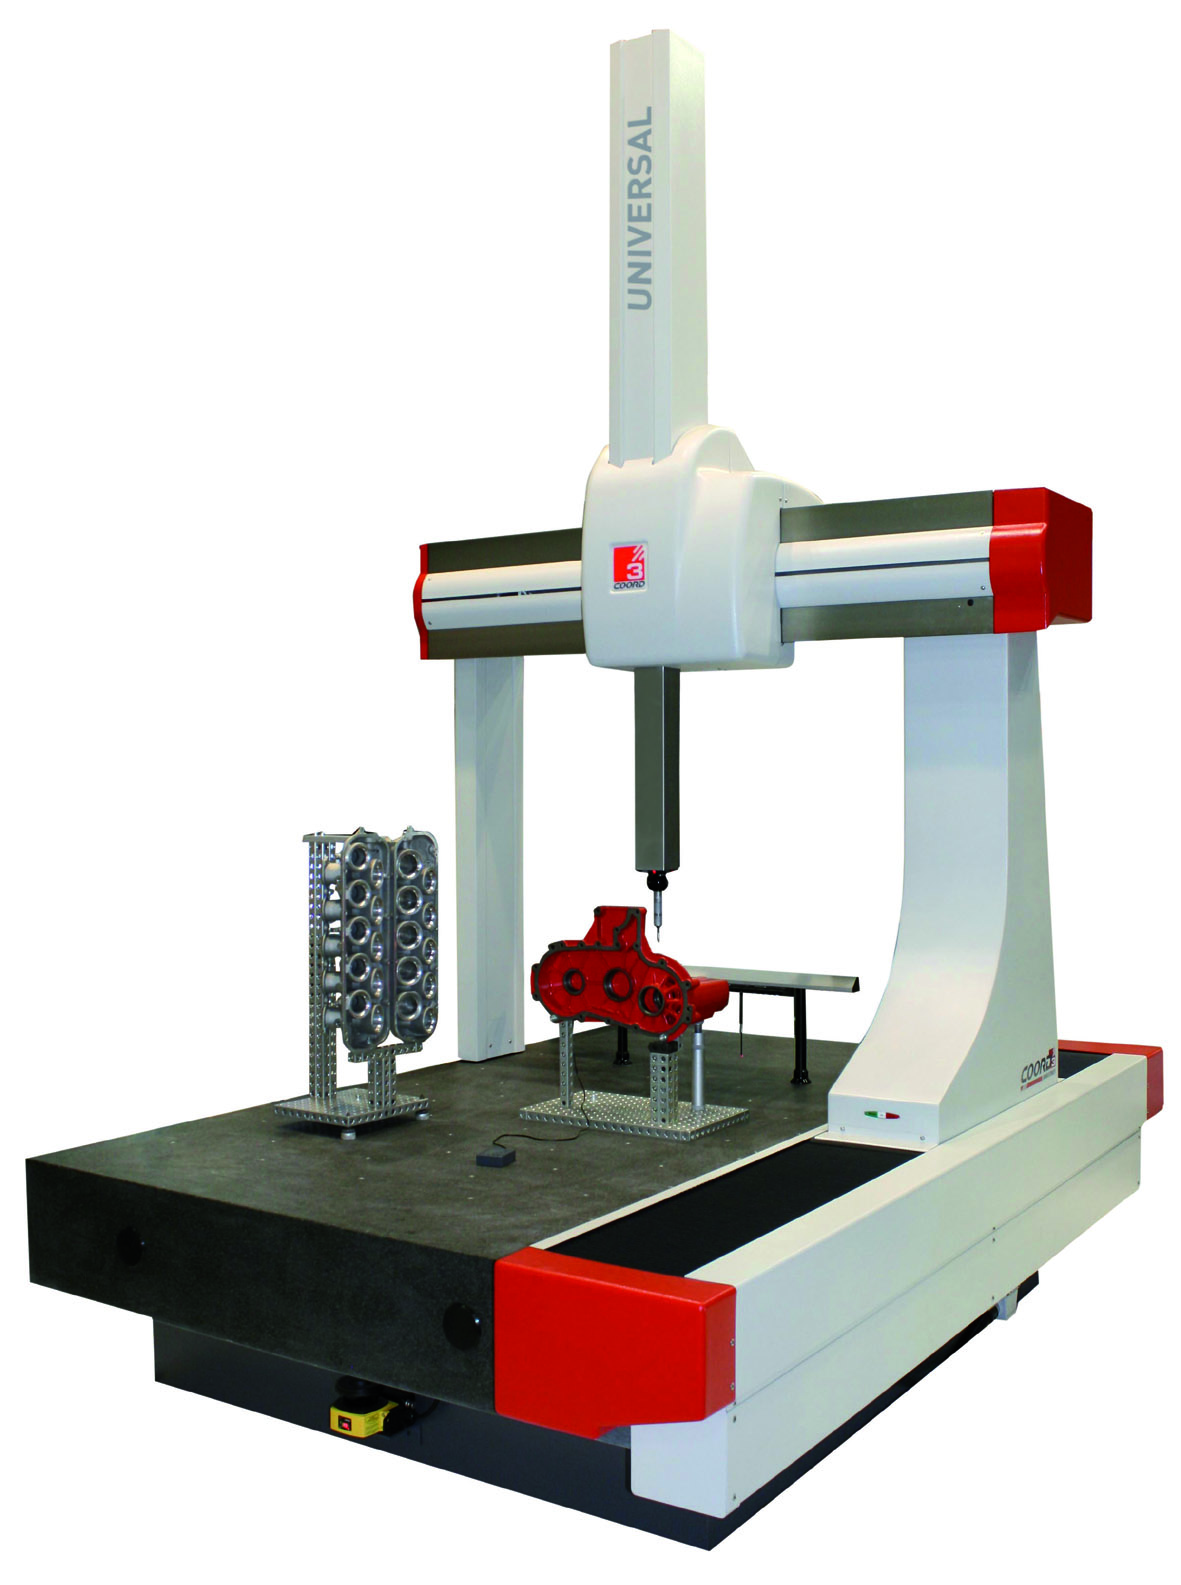 How to Decide Best Coordinate Measuring Machine for Dimensional Inspection